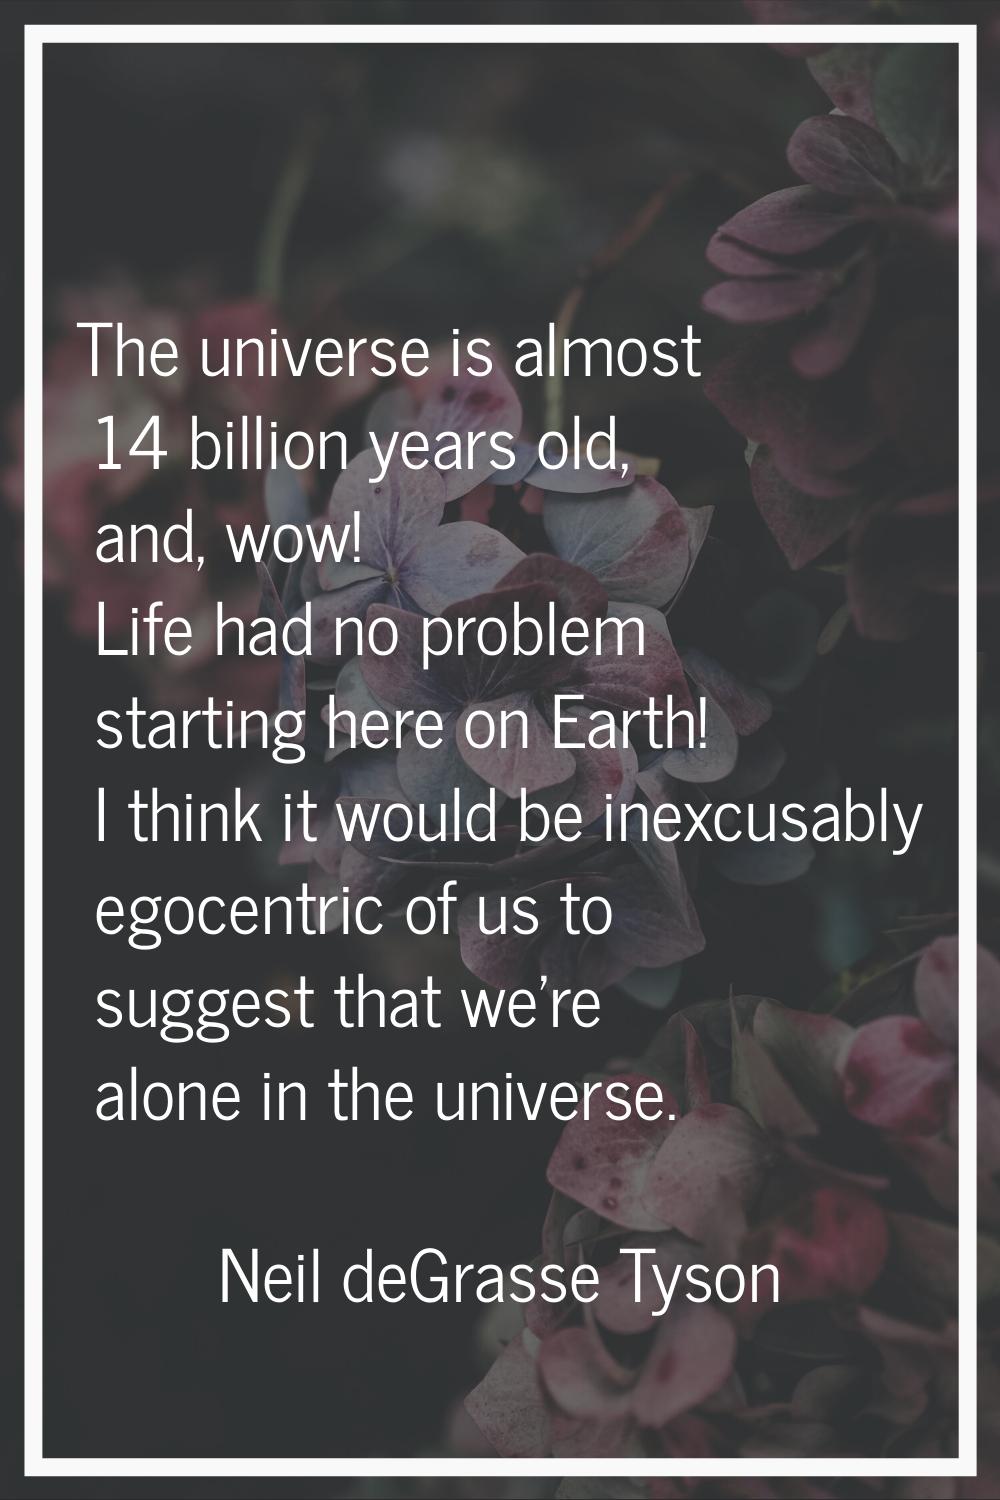 The universe is almost 14 billion years old, and, wow! Life had no problem starting here on Earth! 